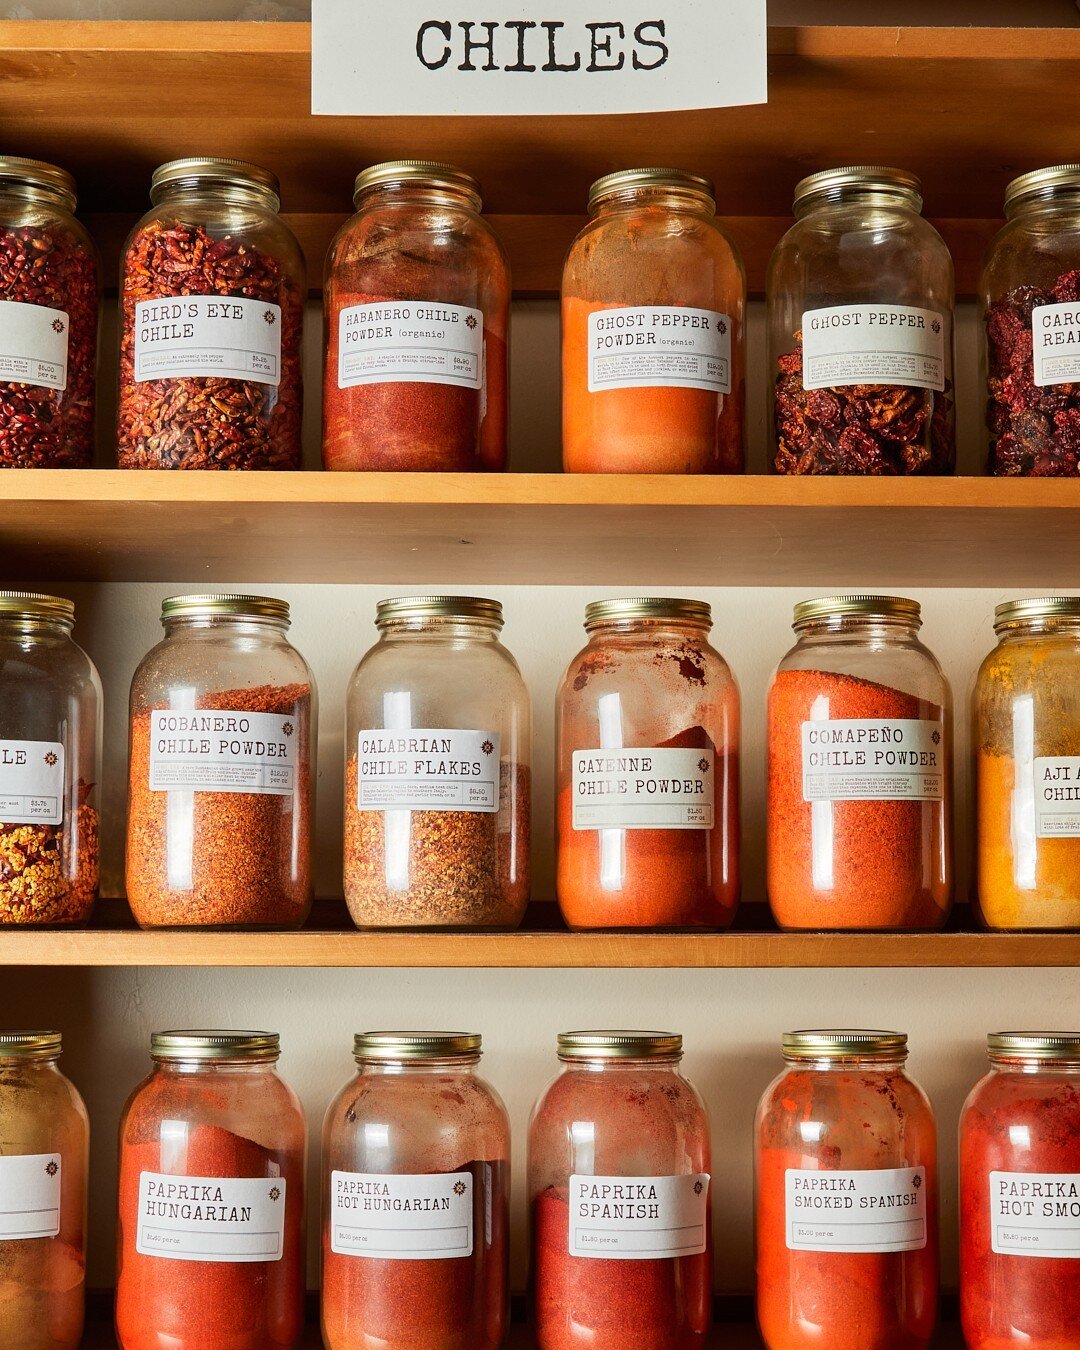 My photography project with @theallspicery also included interior shots of their store. Photos of the jars were essential to capture the variety of products they sell by weight and also display the wide range or products and colors. Look at all those